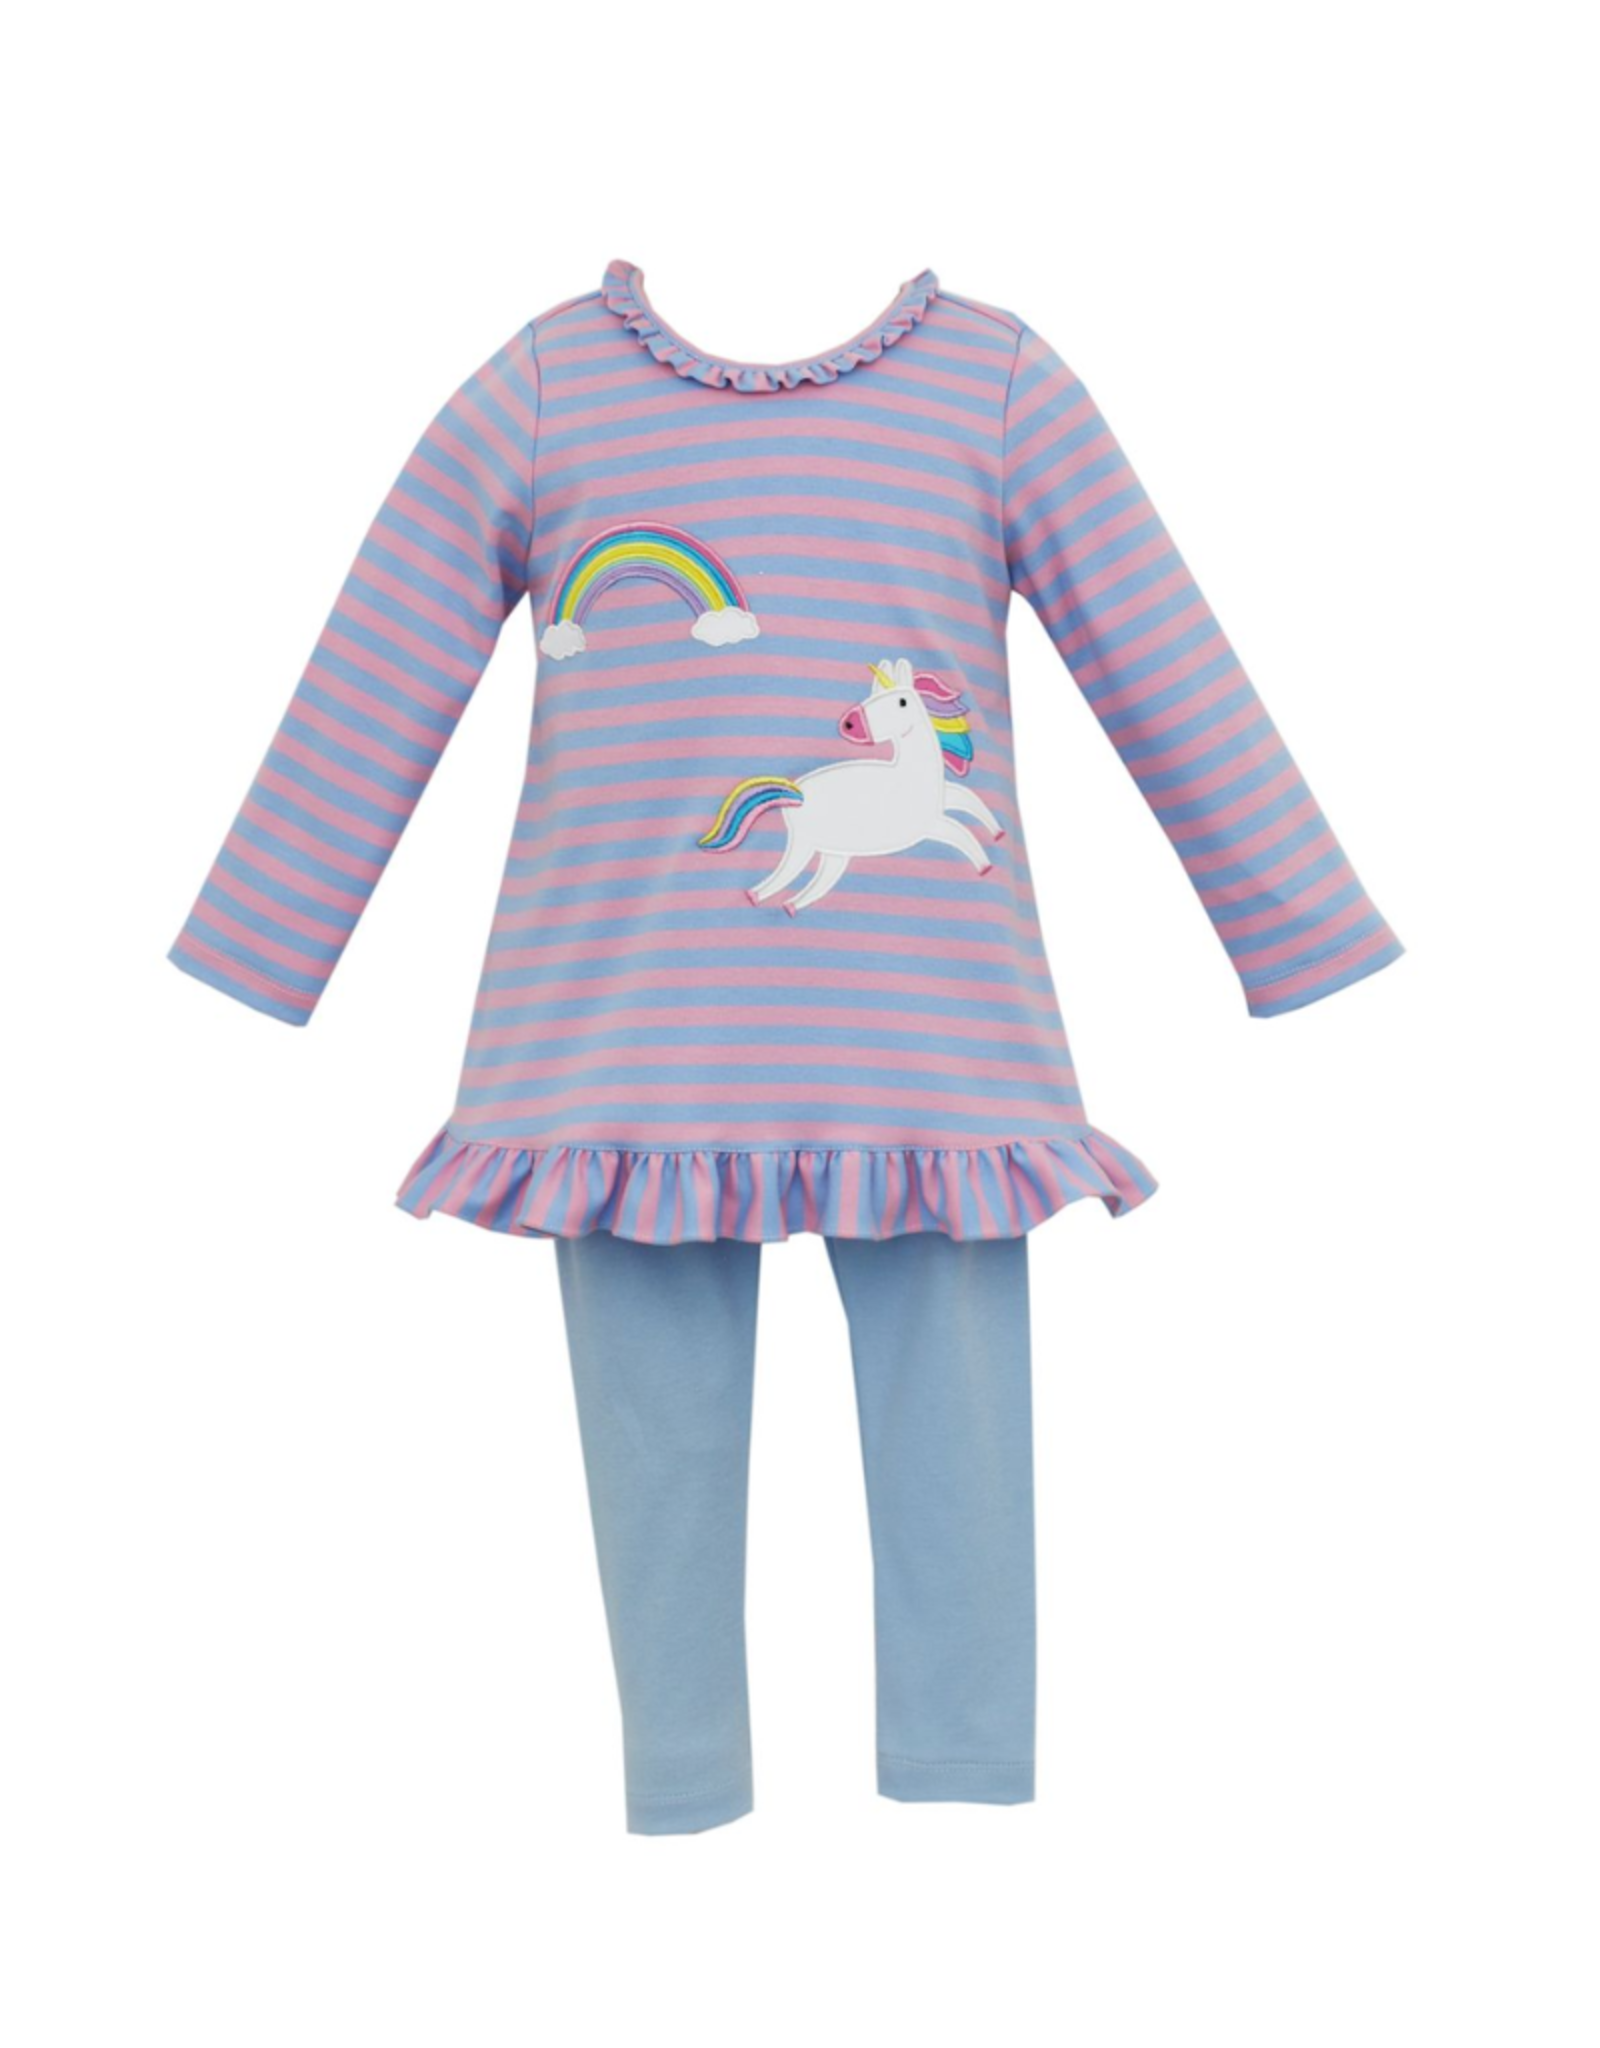 Claire and Charlie Unicorn Pink & Blue Knit Stripe Tunic Set